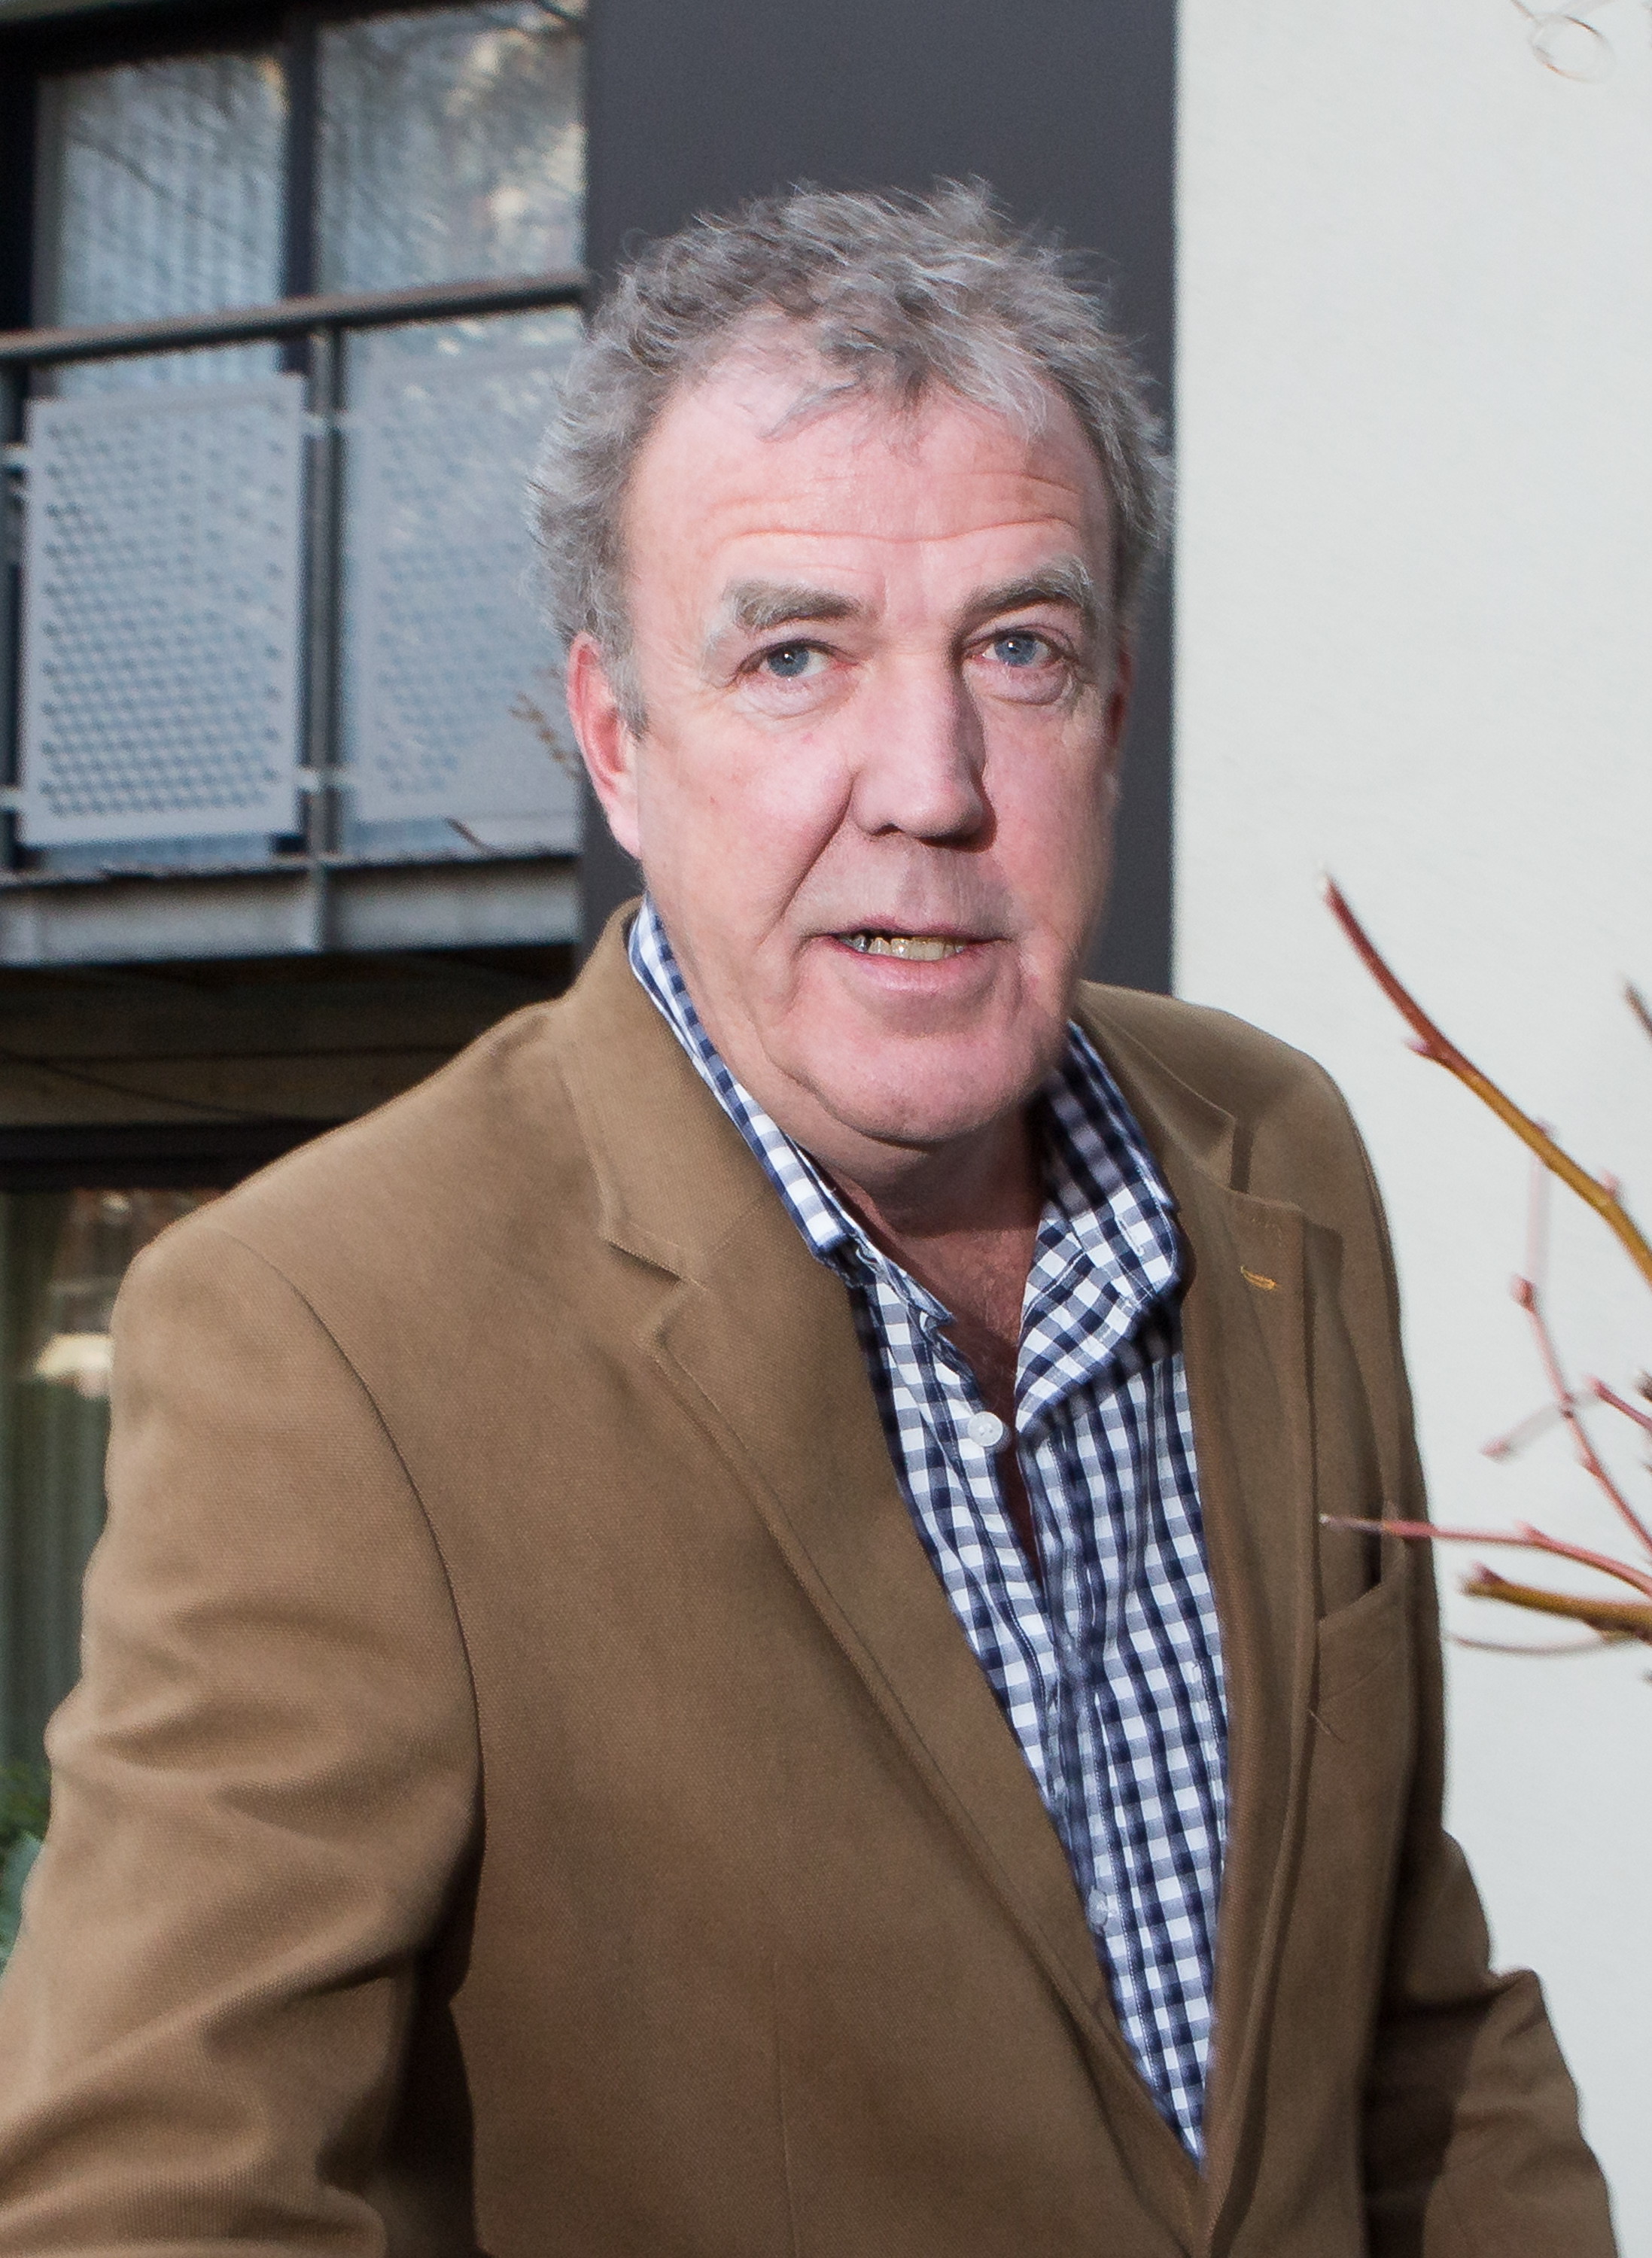 File photo dated March 24, 2015 of Jeremy Clarkson.